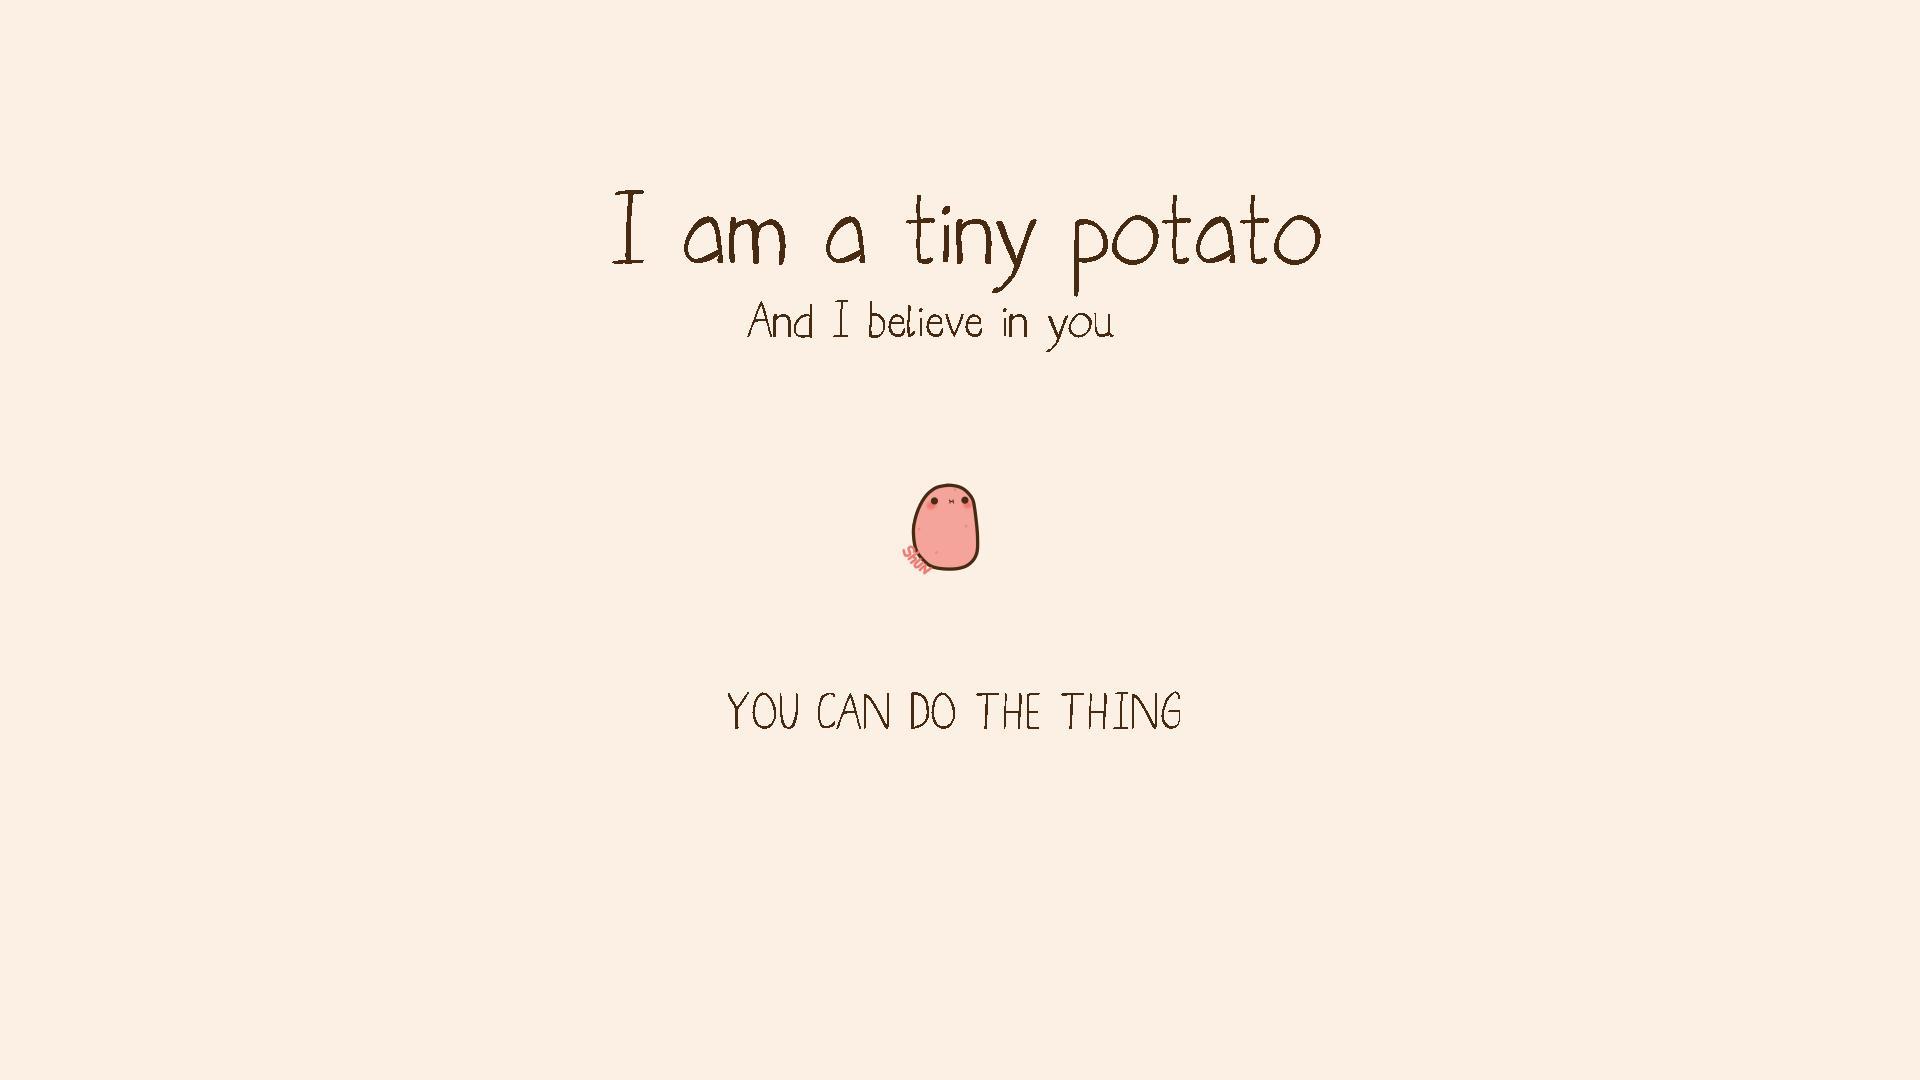 I am a tiny potato and I believe in you. You can do the thing